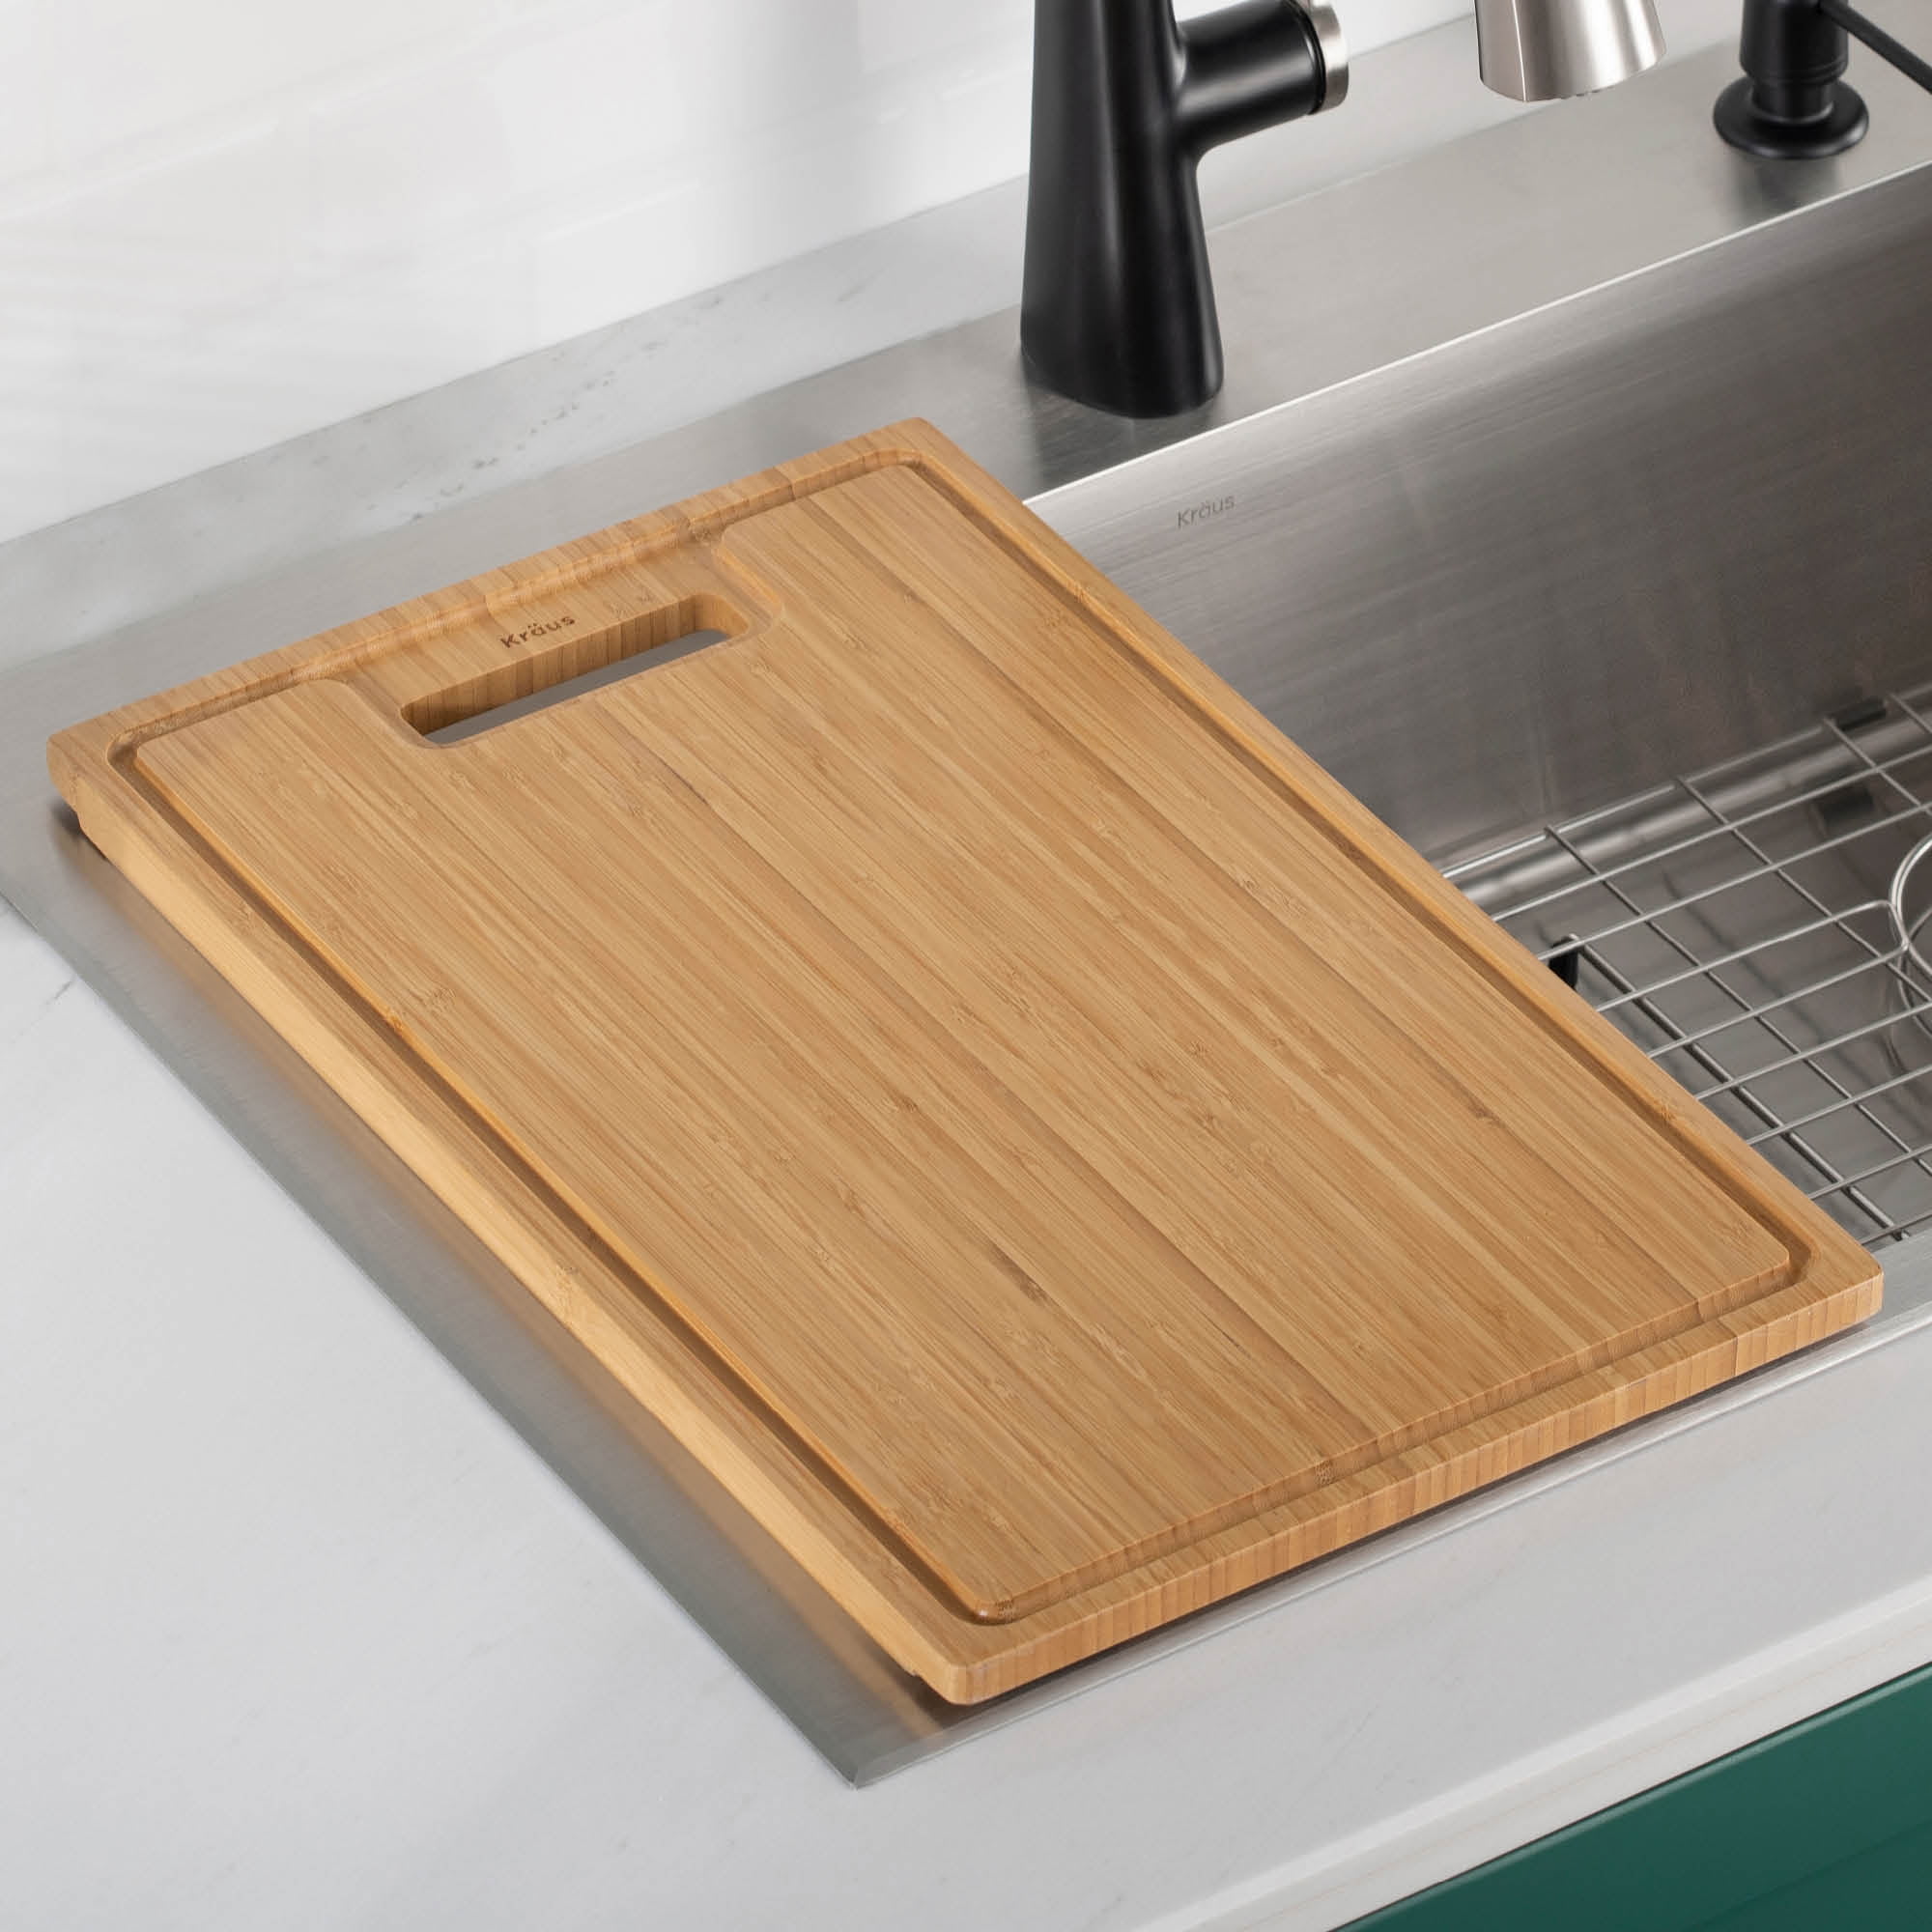 KRAUS Organic Solid Bamboo Cutting Board for Kitchen Sink 19.5" x 12